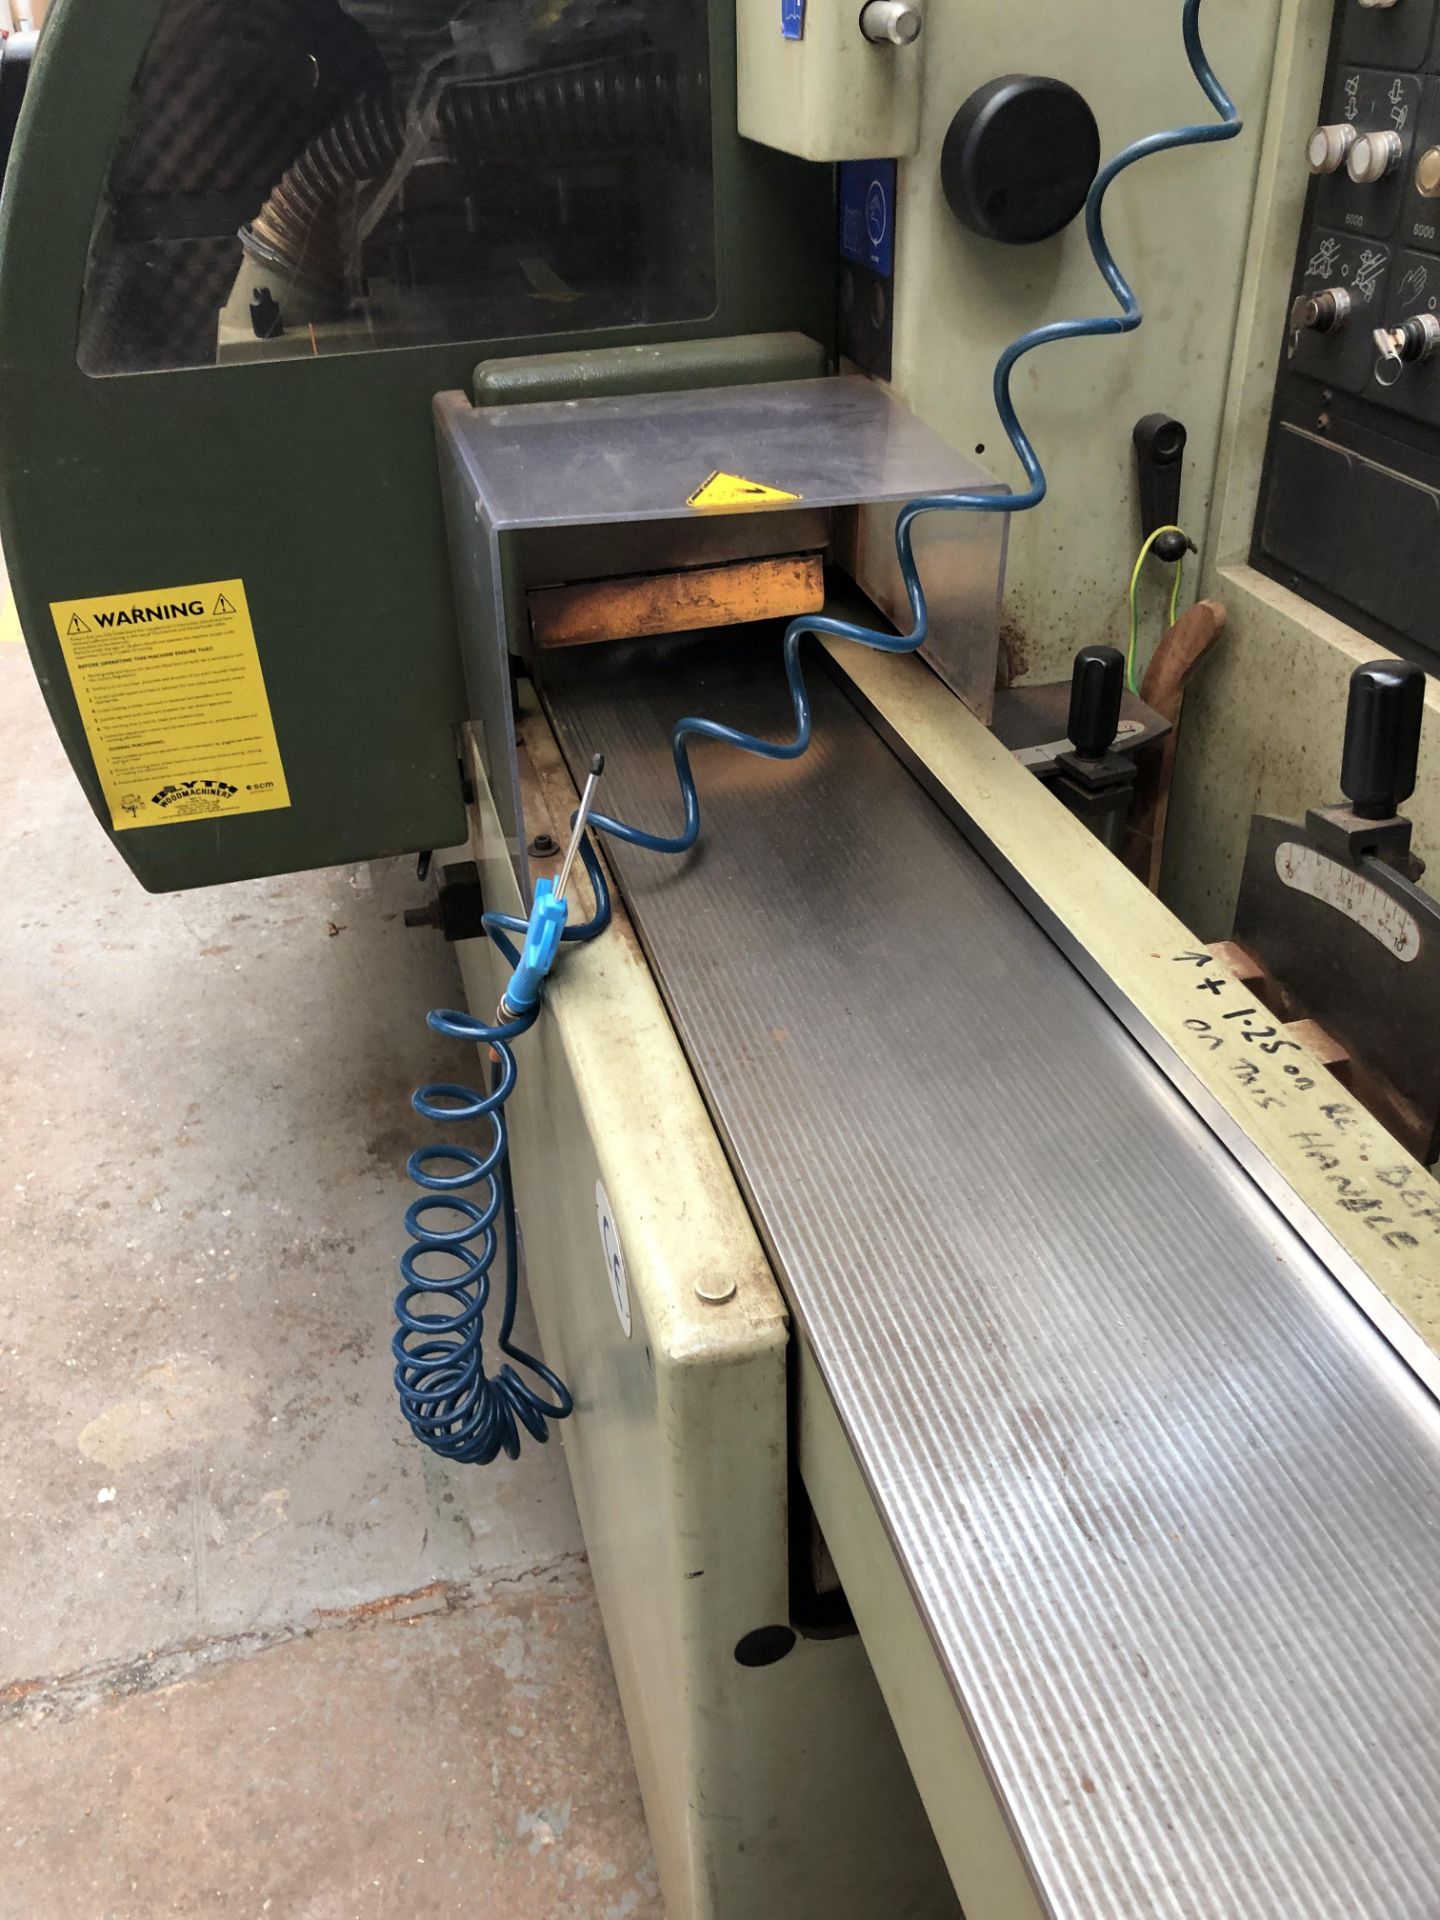 SCM Compact 23 four Sided Planer / Moulder Serial No: AB112396 (1997) 3phase (Please note: Item - Image 11 of 28